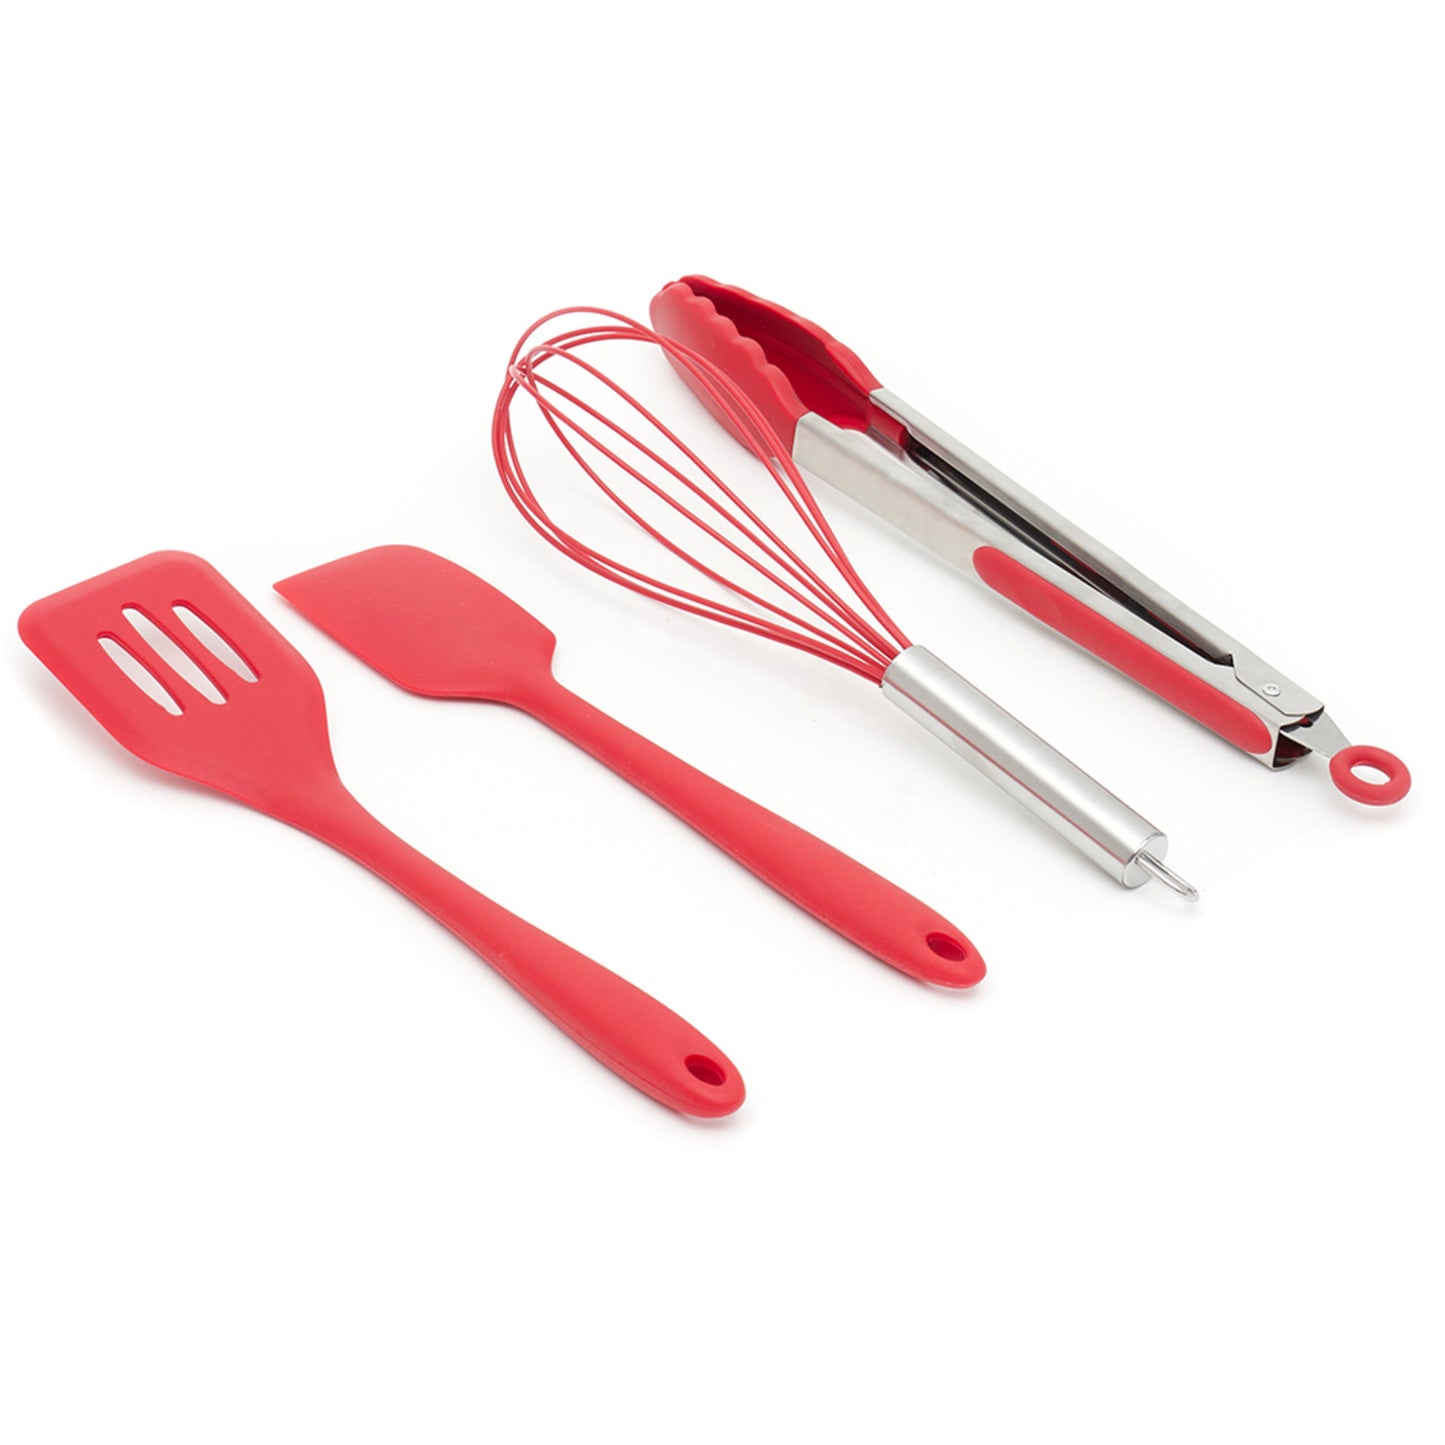 Home Basics 4 Piece Silicone Baking Tool Set, Red - Red